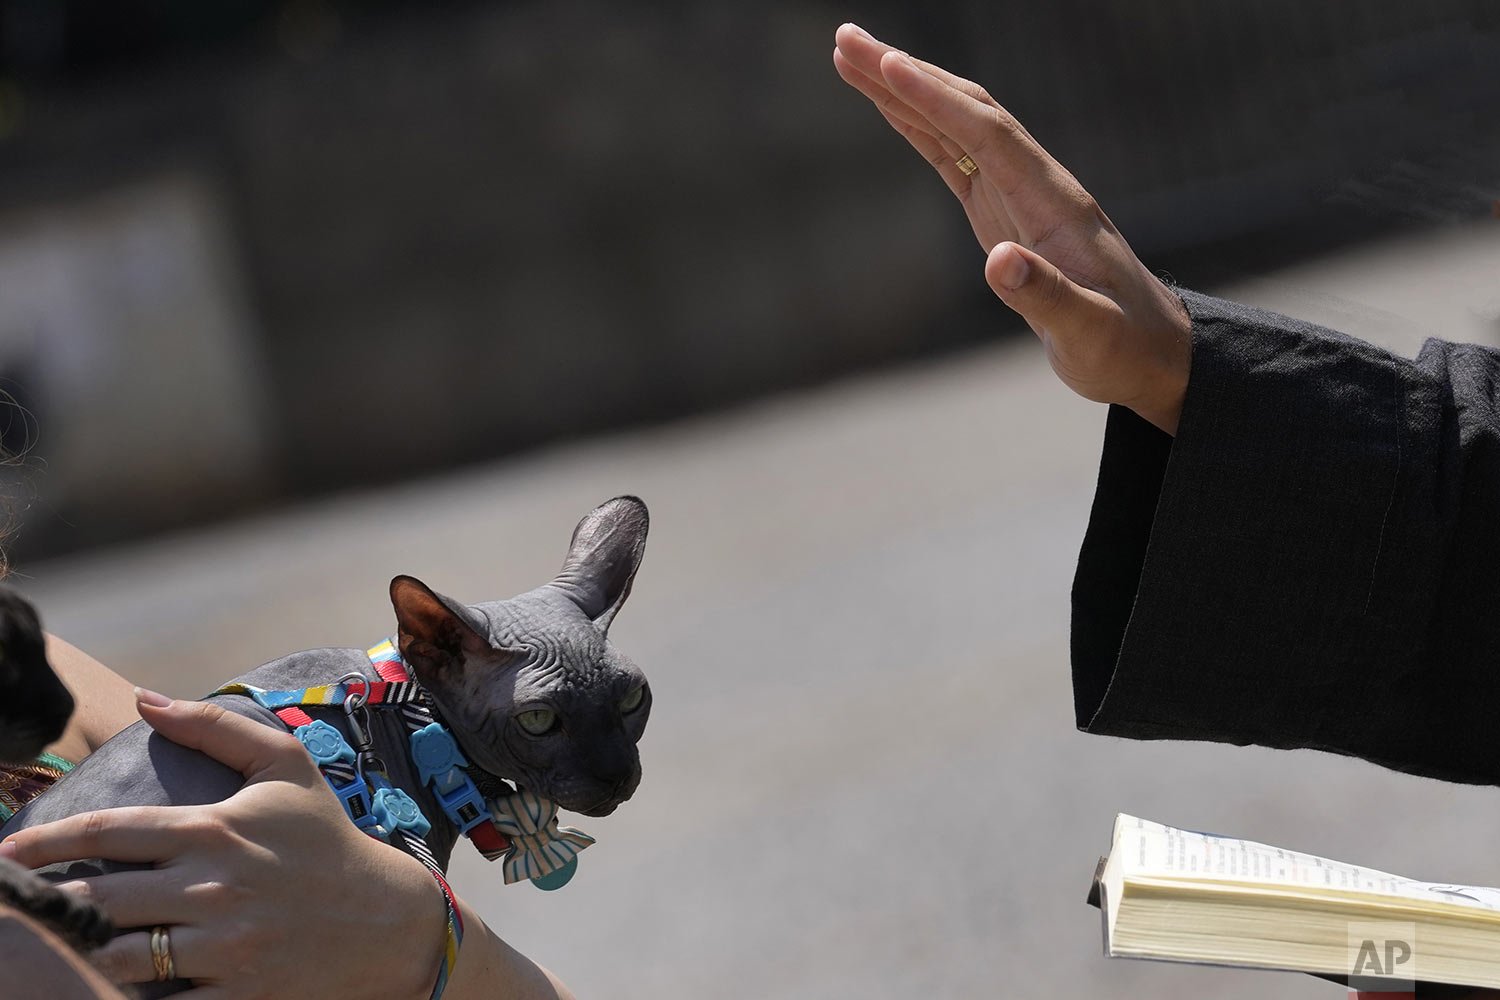  A Franciscan monk blesses a pet cat during a Mass in honor of Saint Francis of Assisi, considered the protector of animals, on the saint’s feast day in Brasilia, Brazil, Oct. 4, 2021. (AP Photo/Eraldo Peres) 